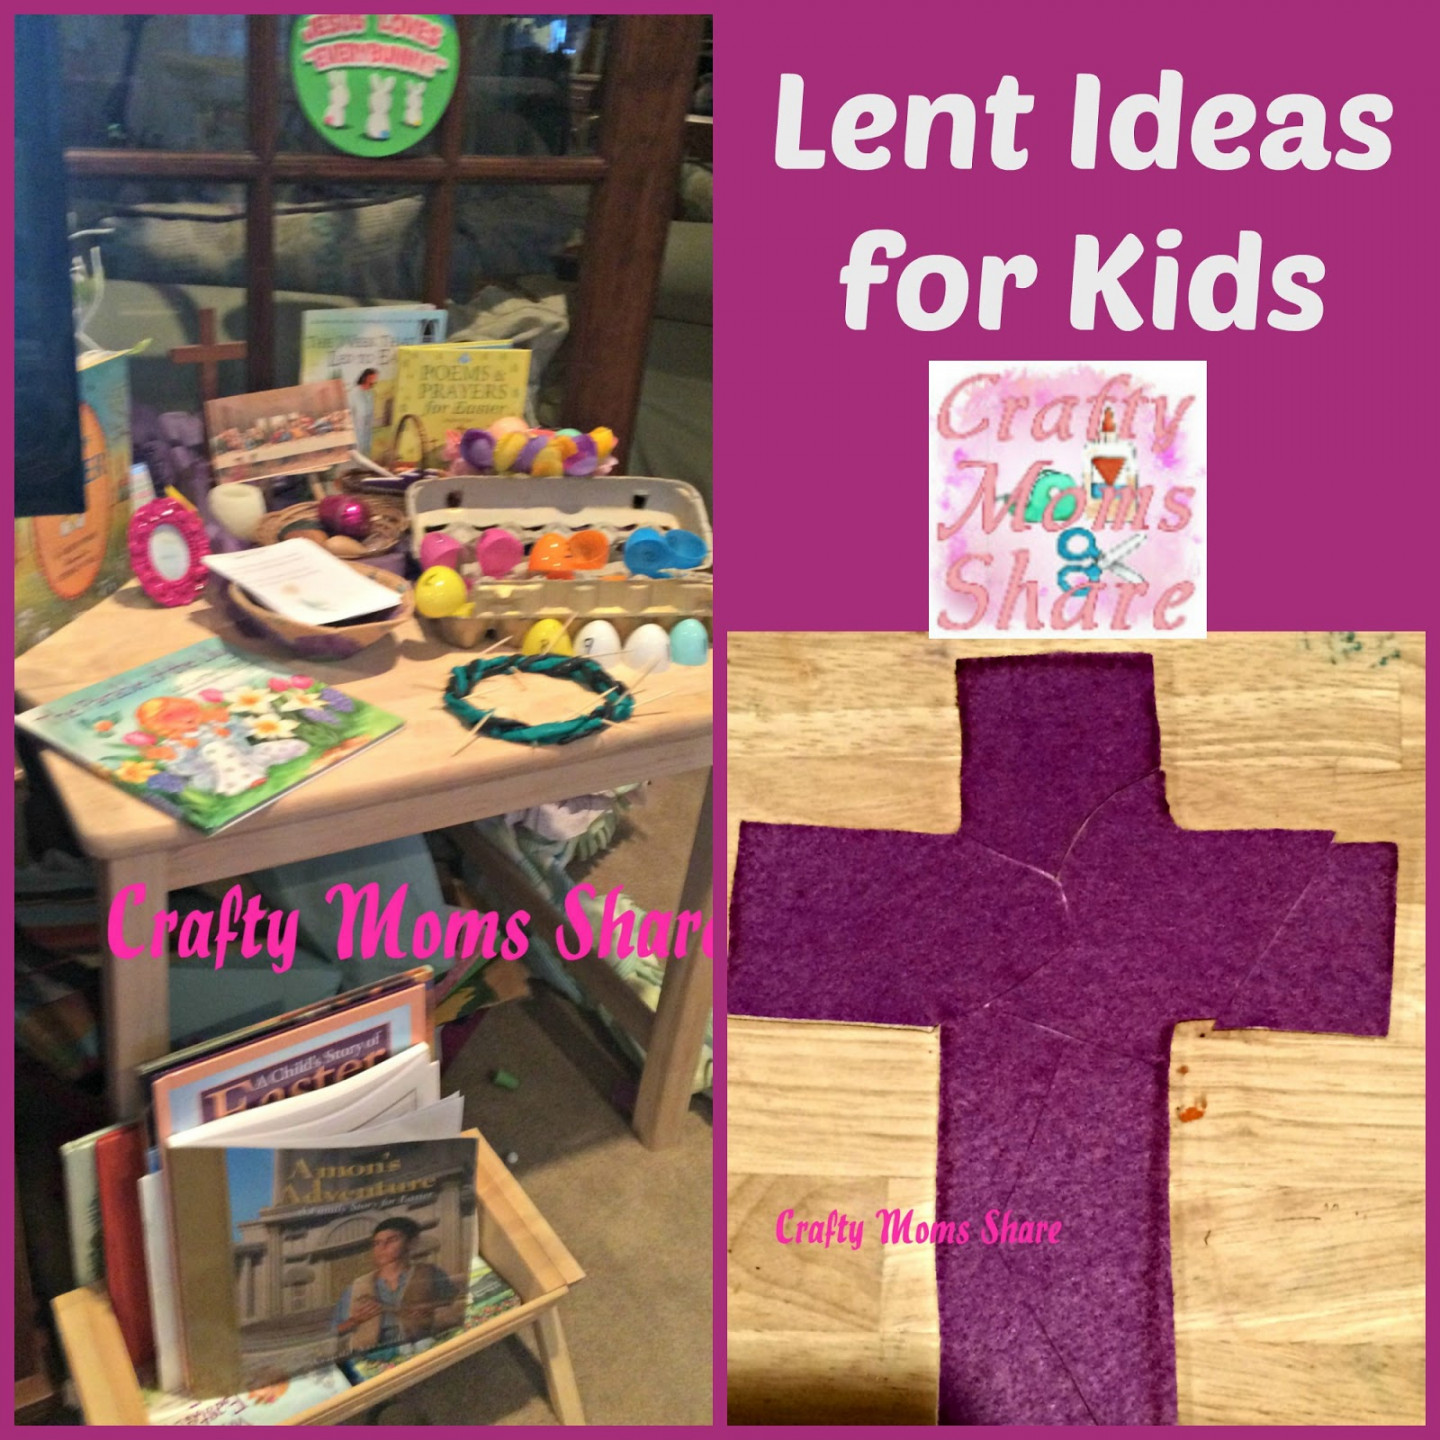 Crafty Moms Share: Lent Ideas for Kids